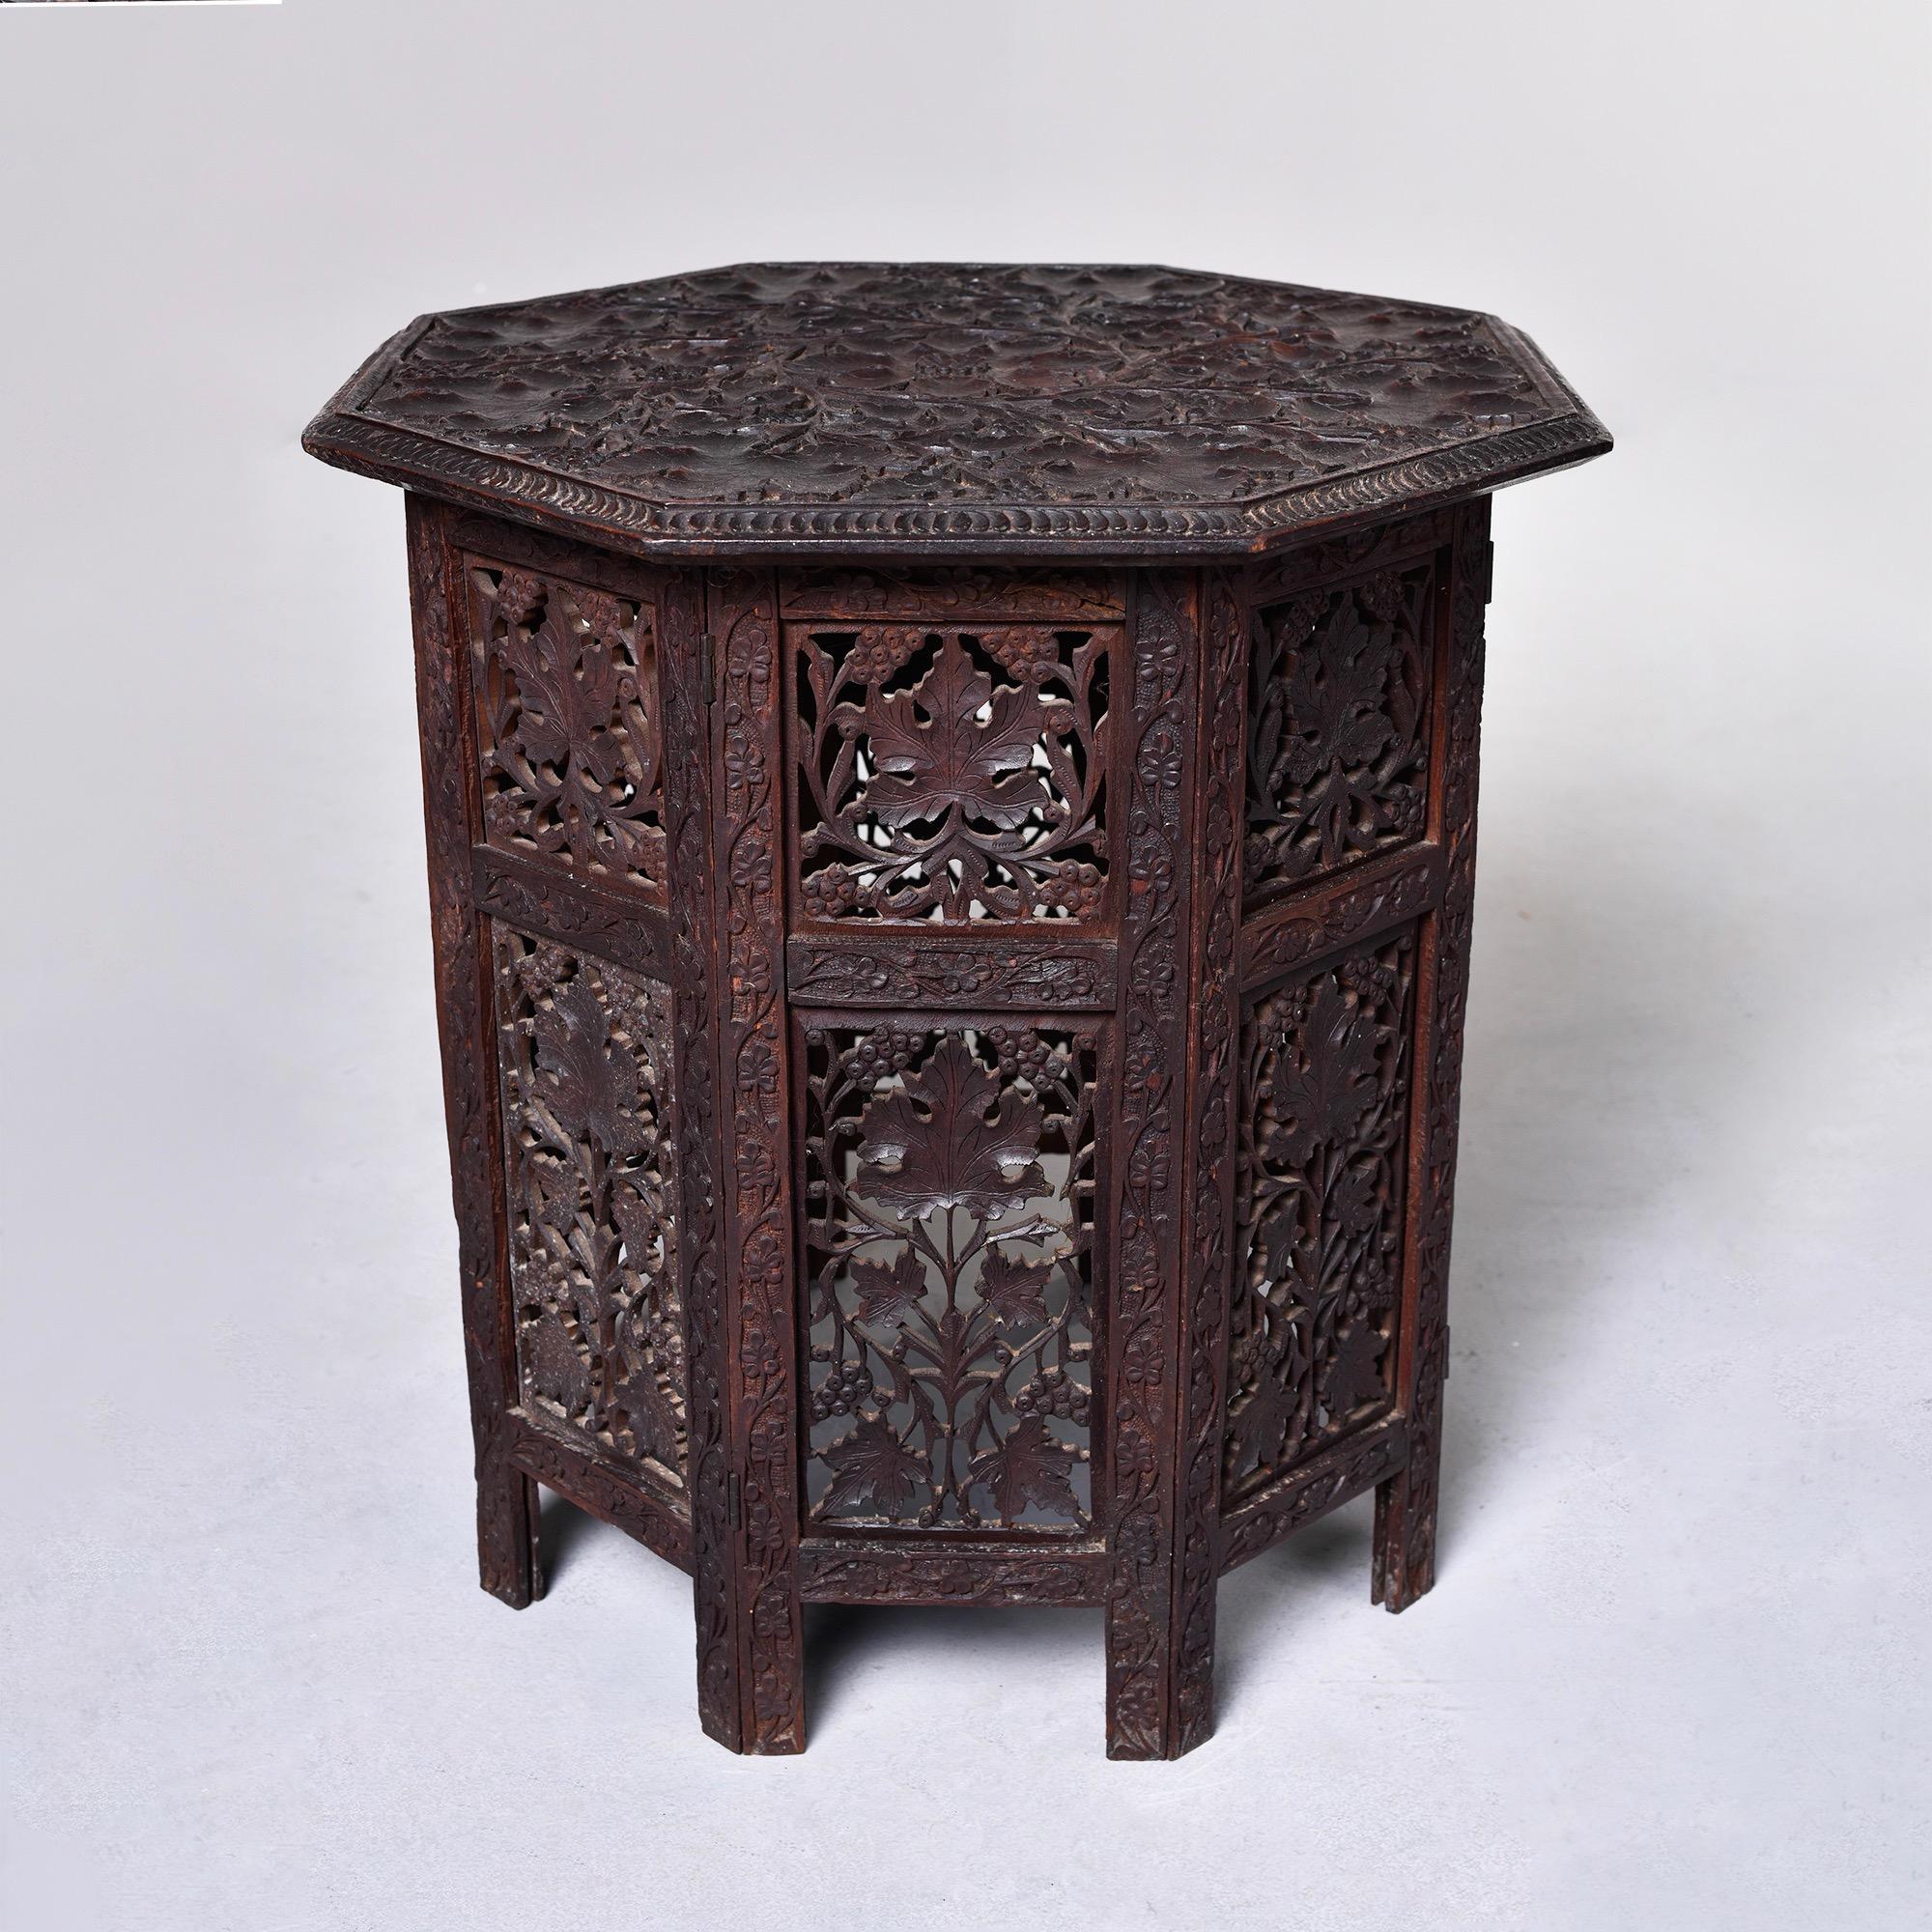 Circa 1960s intricately carved dark stained teak side table in Moorish design. Top can lift off and sides are hinged so this can be folded flat for low-cost shipping option. Unknown maker.